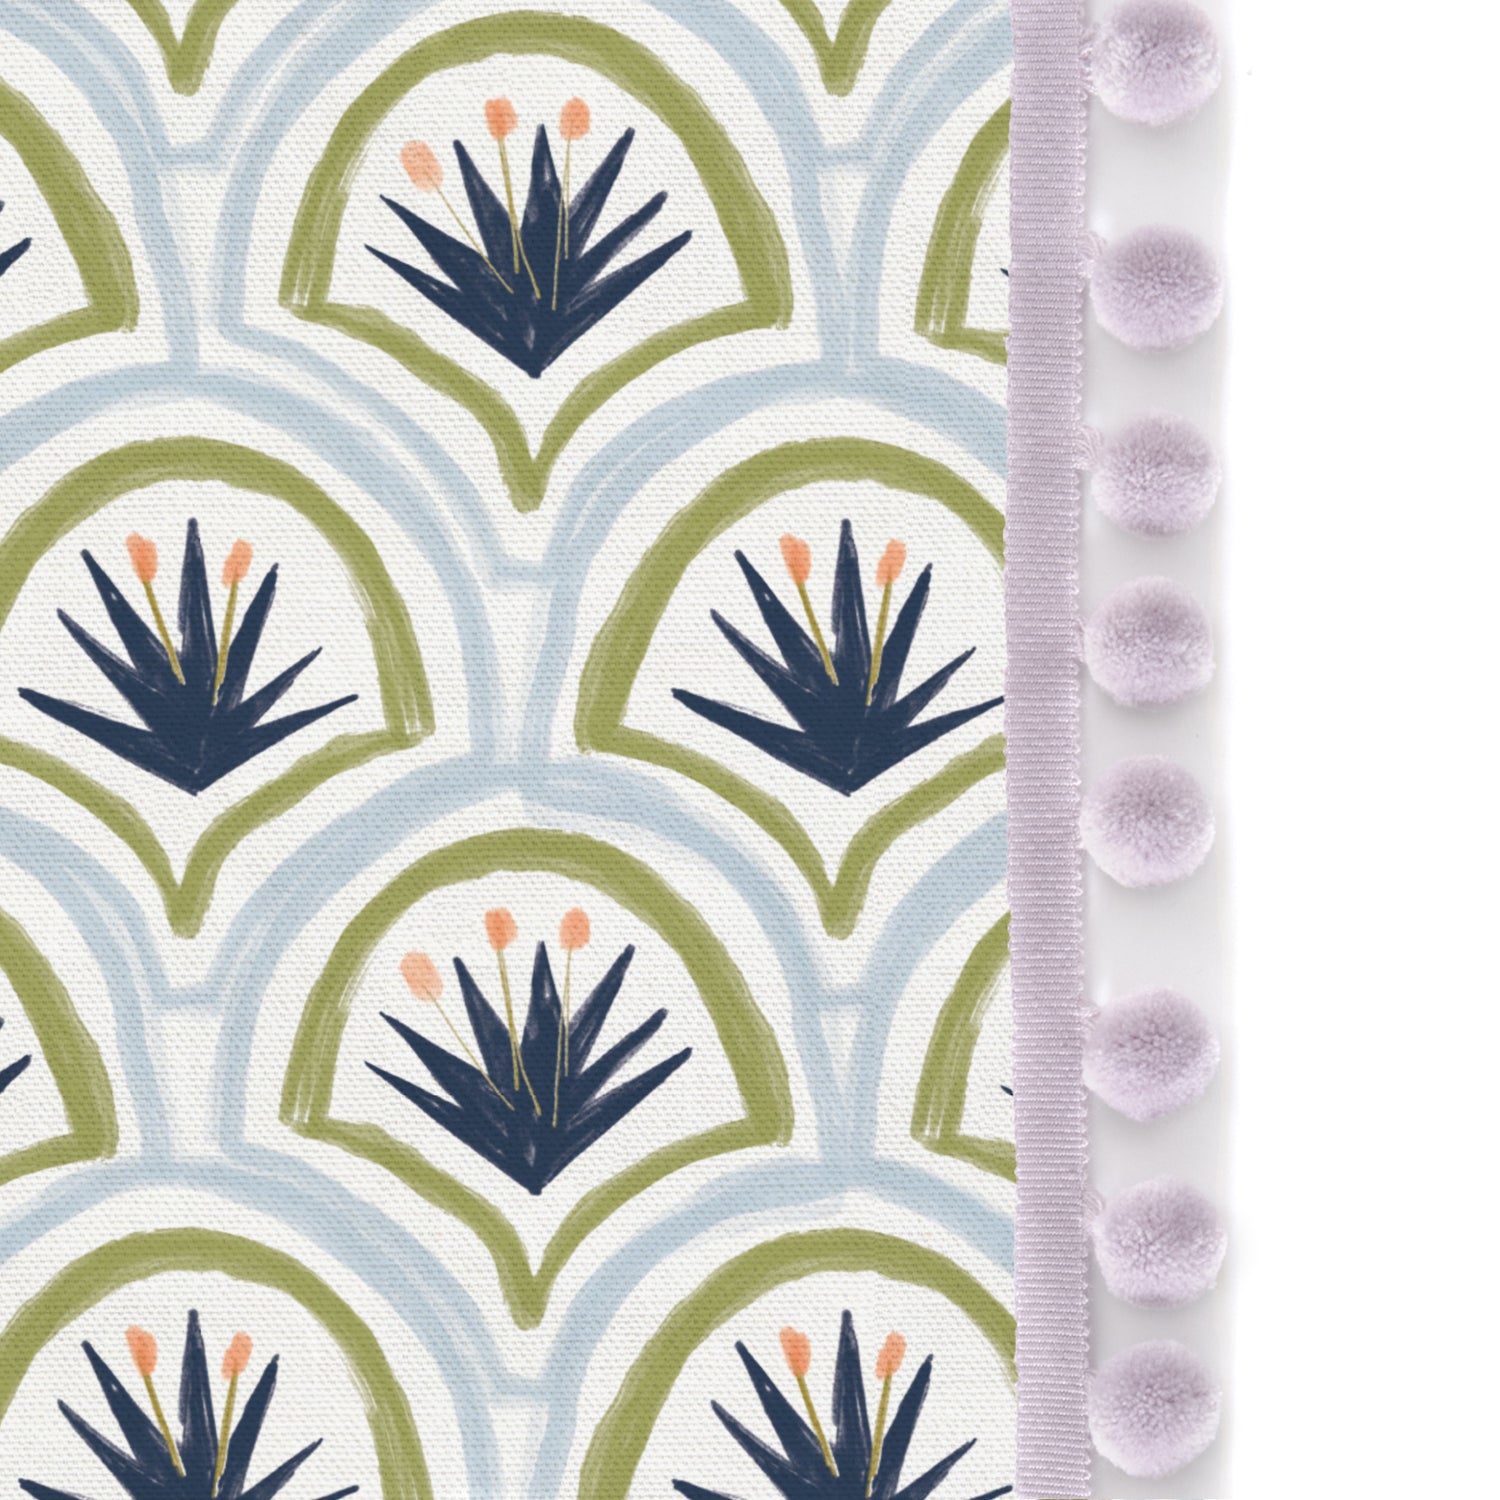 Upclose picture of Thatcher Midnight custom Art Deco Palm Patterncurtain with lilac pom pom trim